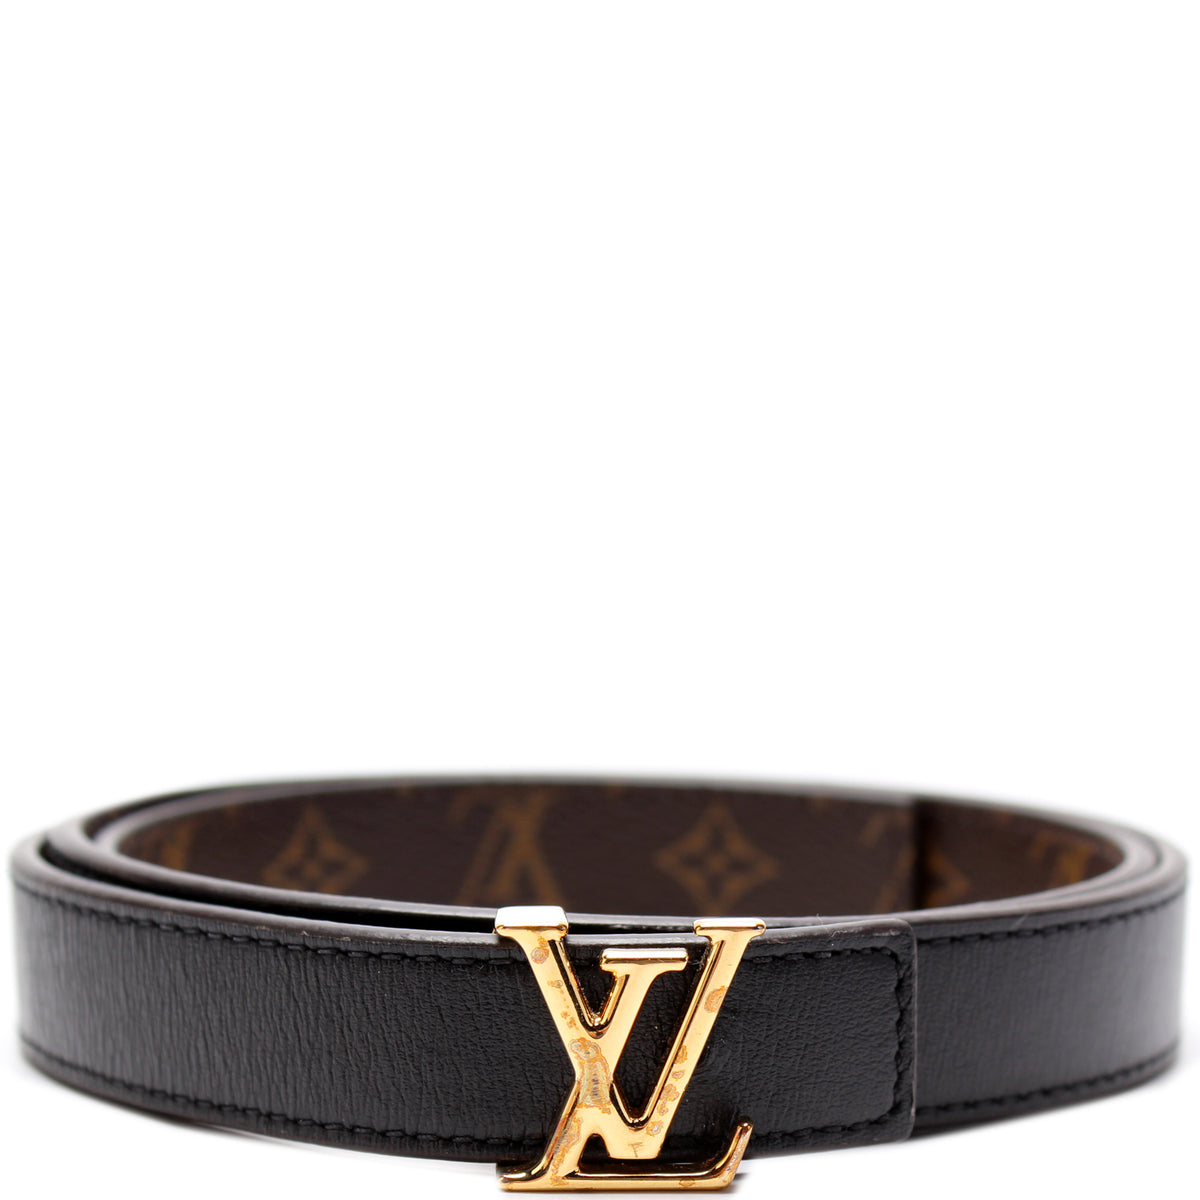 Louis Vuitton LV Iconic 20mm Reversible Belt, Beige, 80 cm (Stock Confirmation Required)